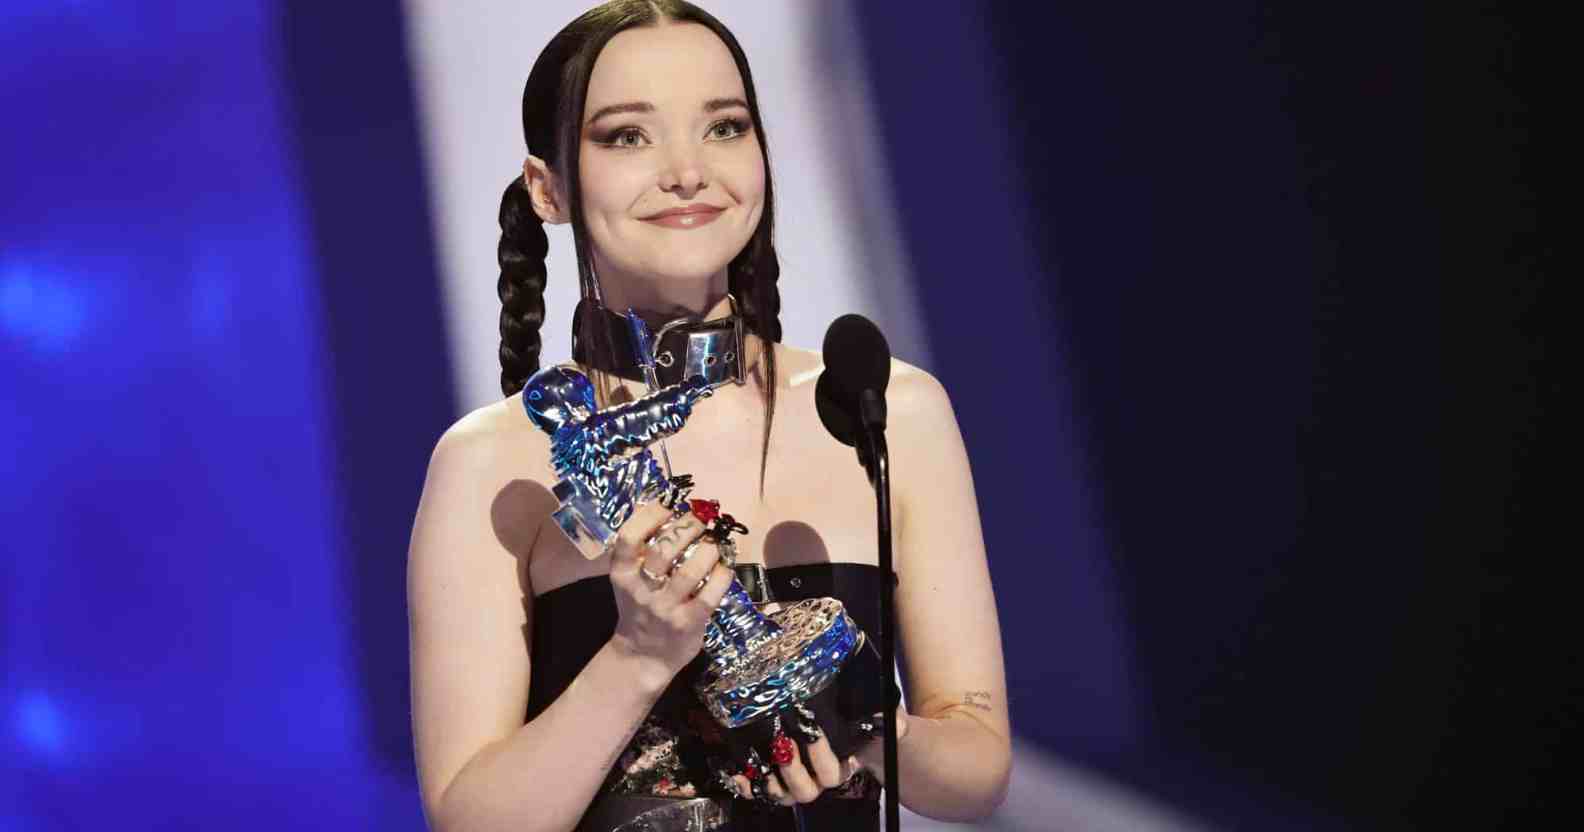 Dove Cameron holds up an MTV VMAs Moon Man award on stage